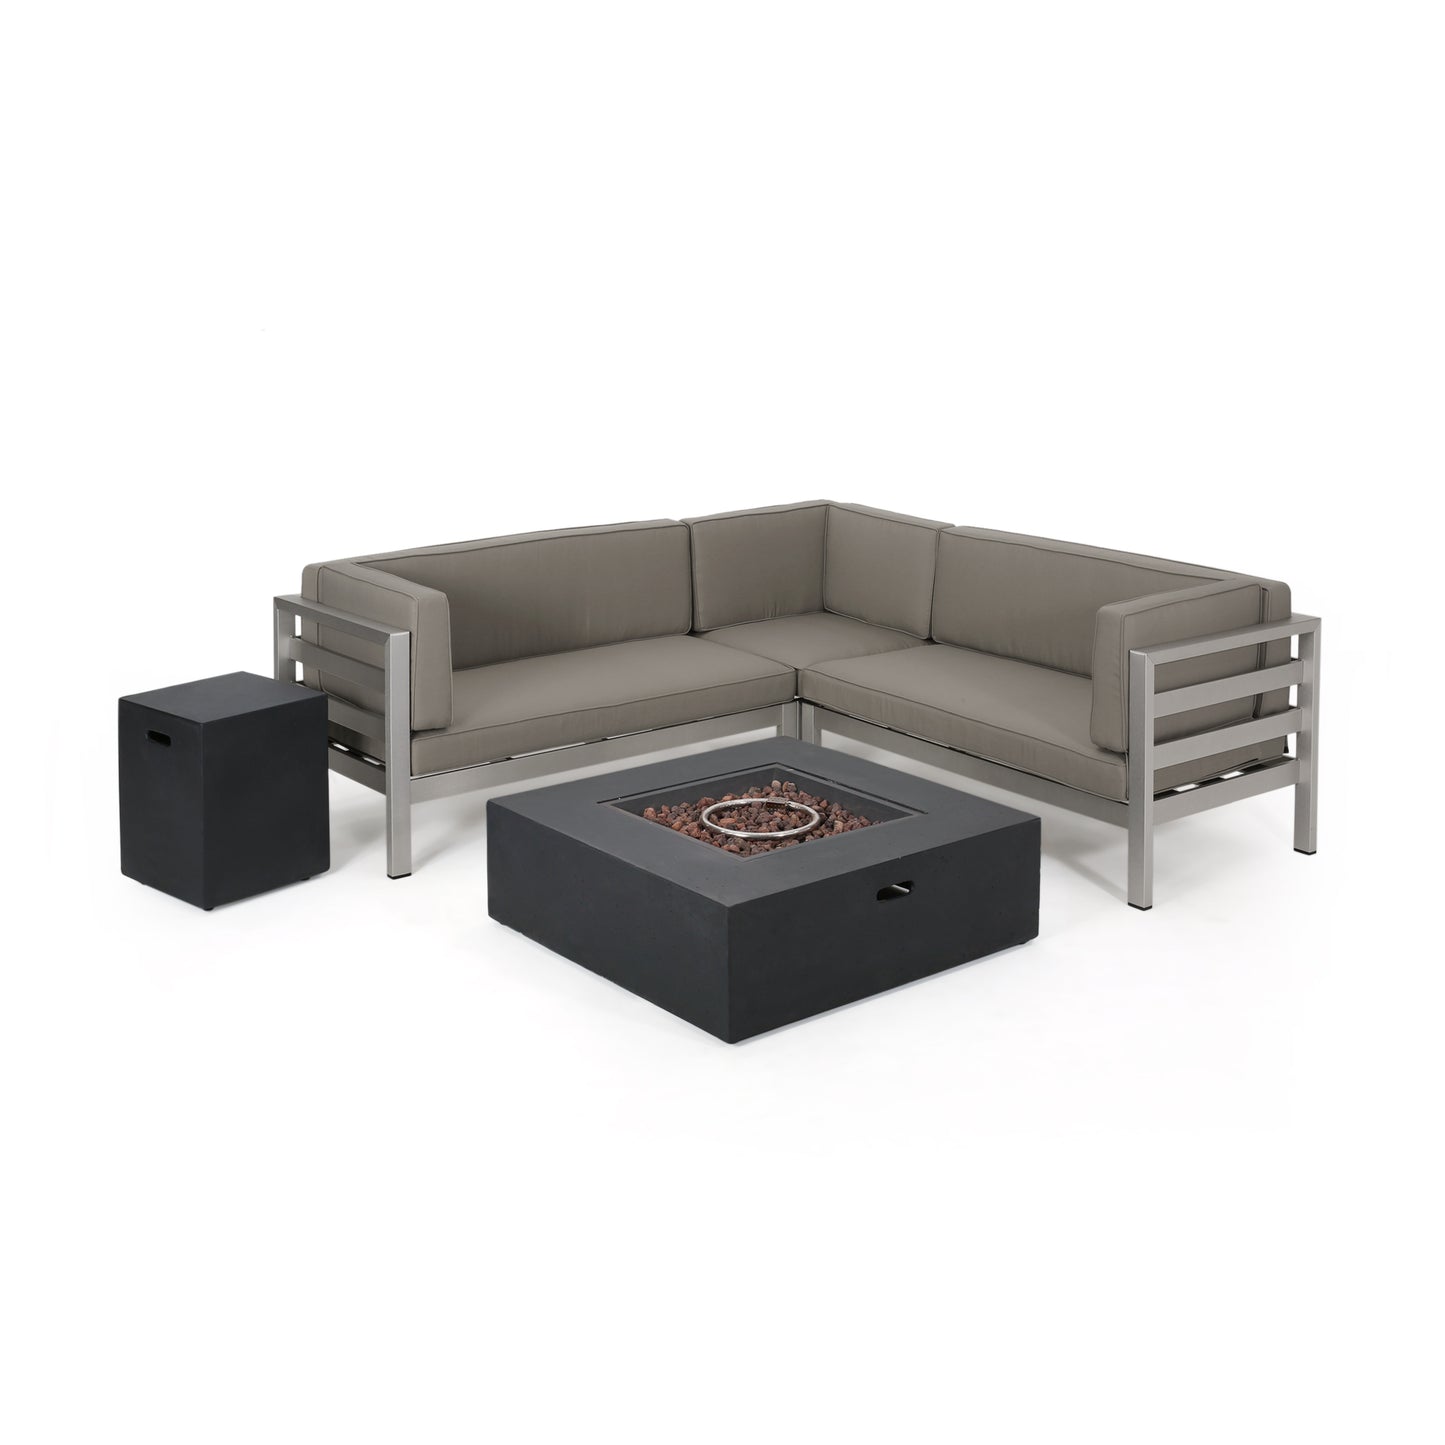 Lompoc Aire Outdoor Modern 5 Seater V-Shaped Sectional Sofa Set with Fire Pit and Tank Holder